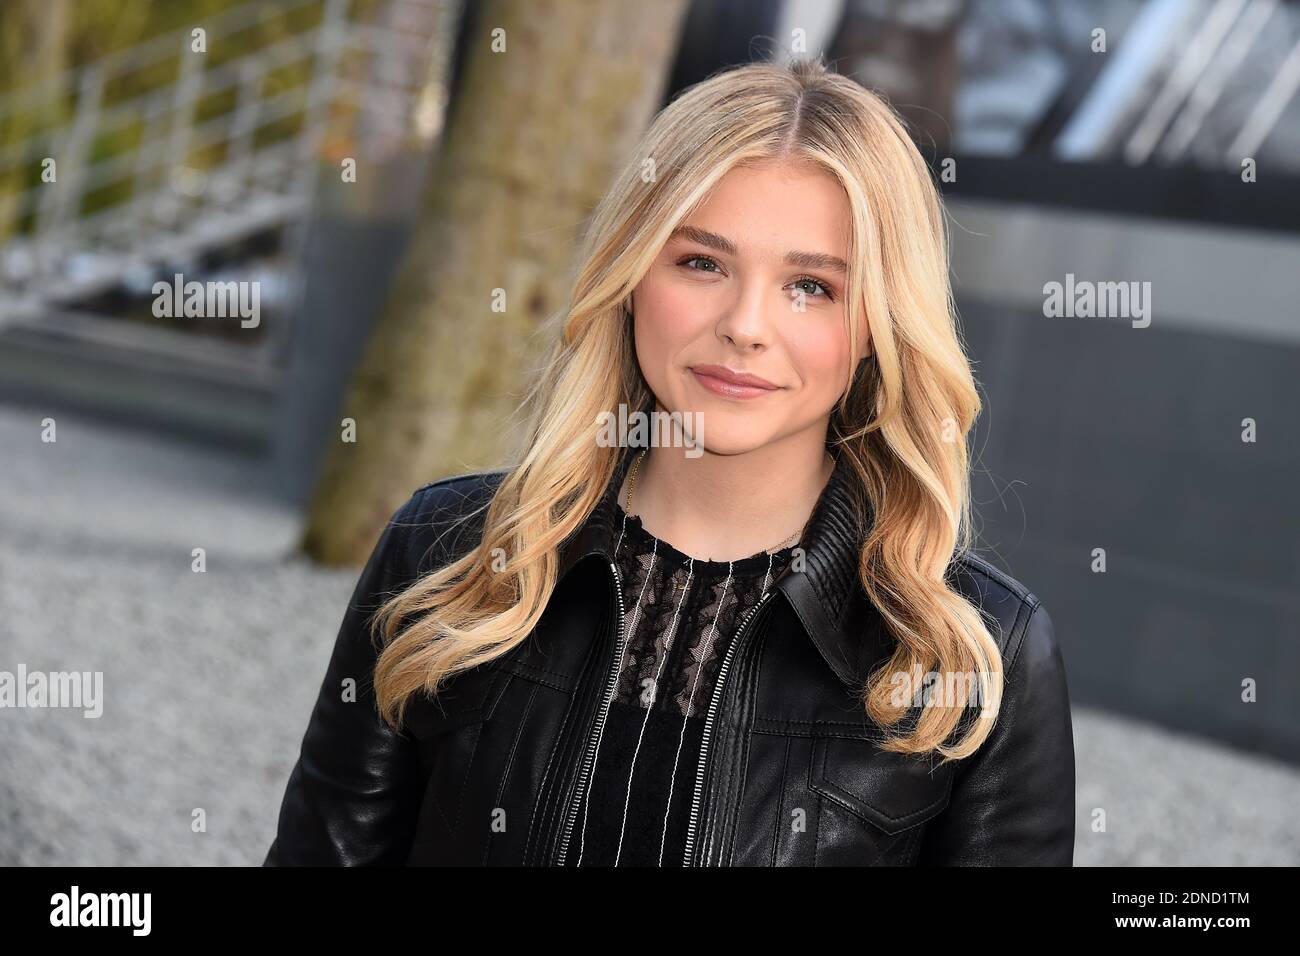 Chloë Grace Moretz's Photo Diary From the Fall 2018 Louis Vuitton